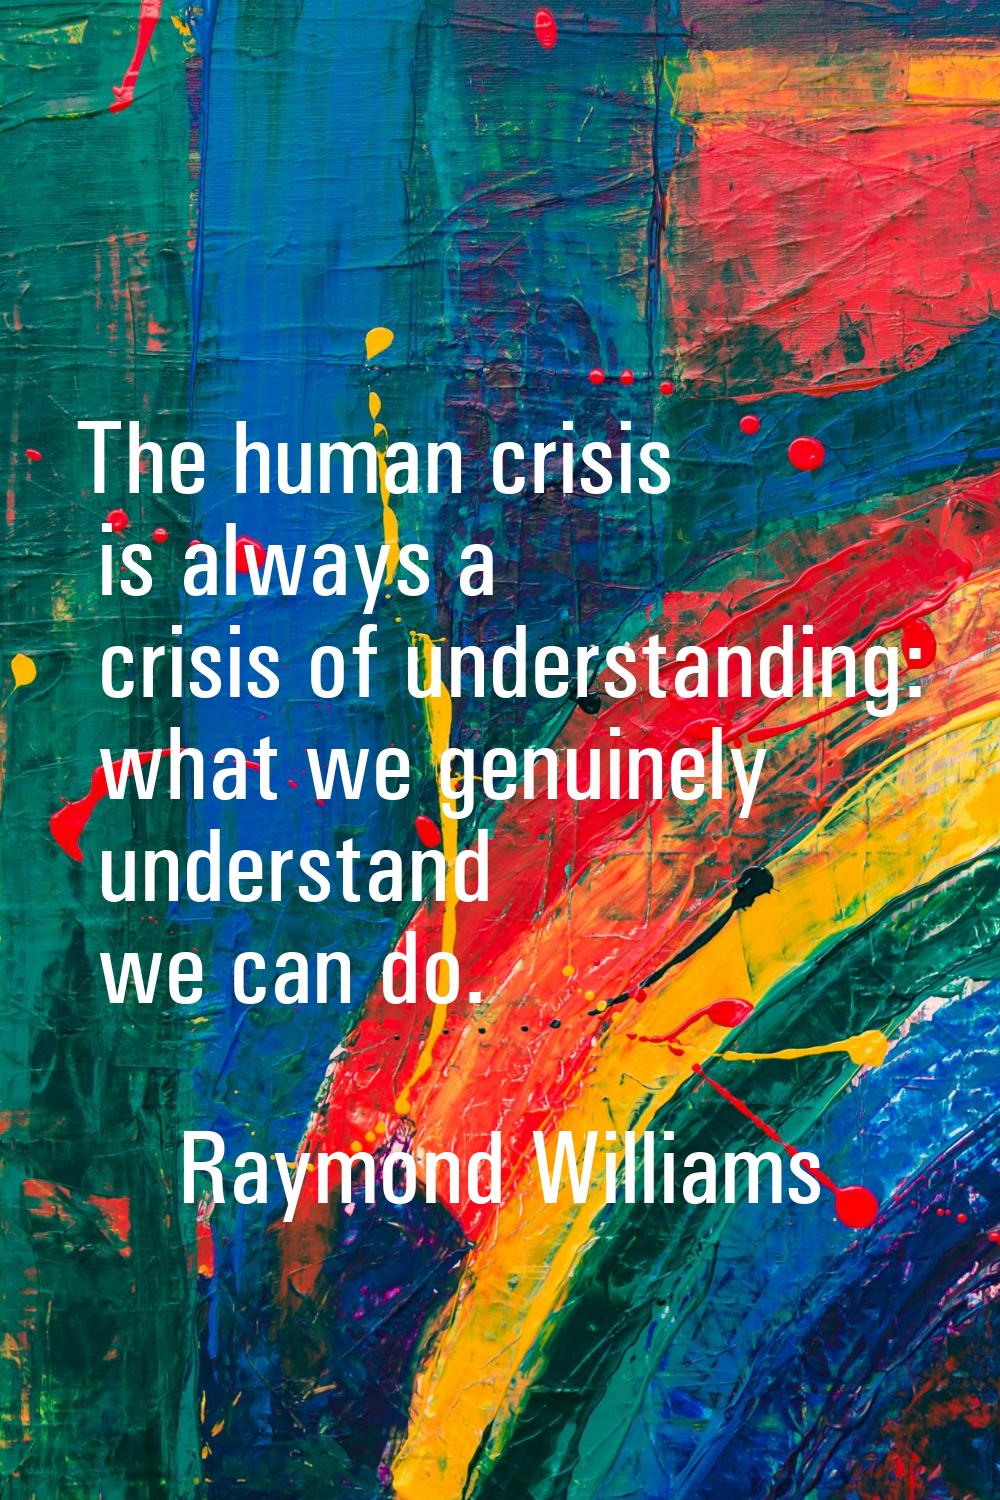 The human crisis is always a crisis of understanding: what we genuinely understand we can do.